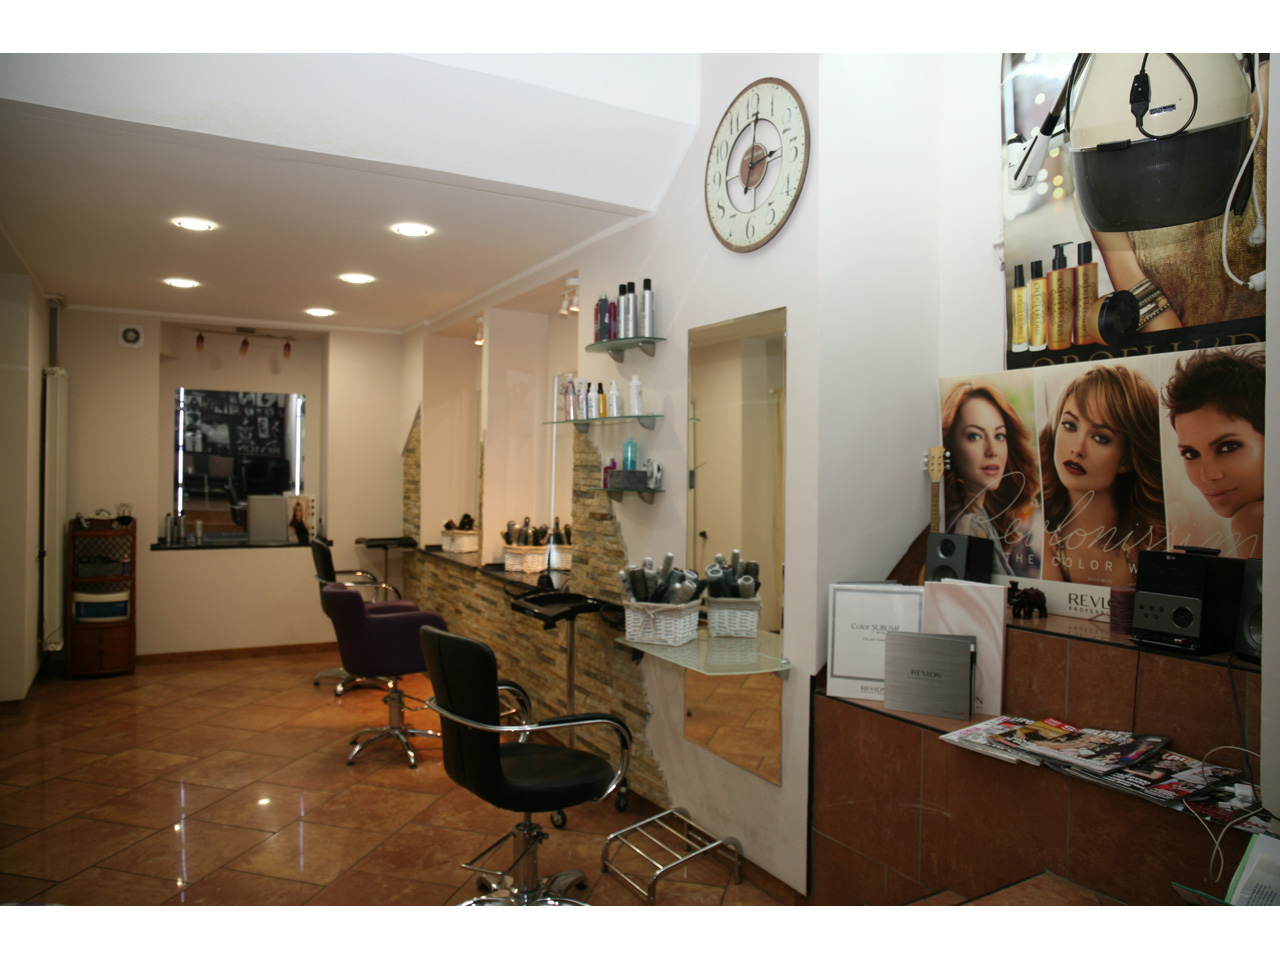 BUBI T - COSMETIC AND HAIRDRESSING SALON Hairdressers Belgrade - Photo 6